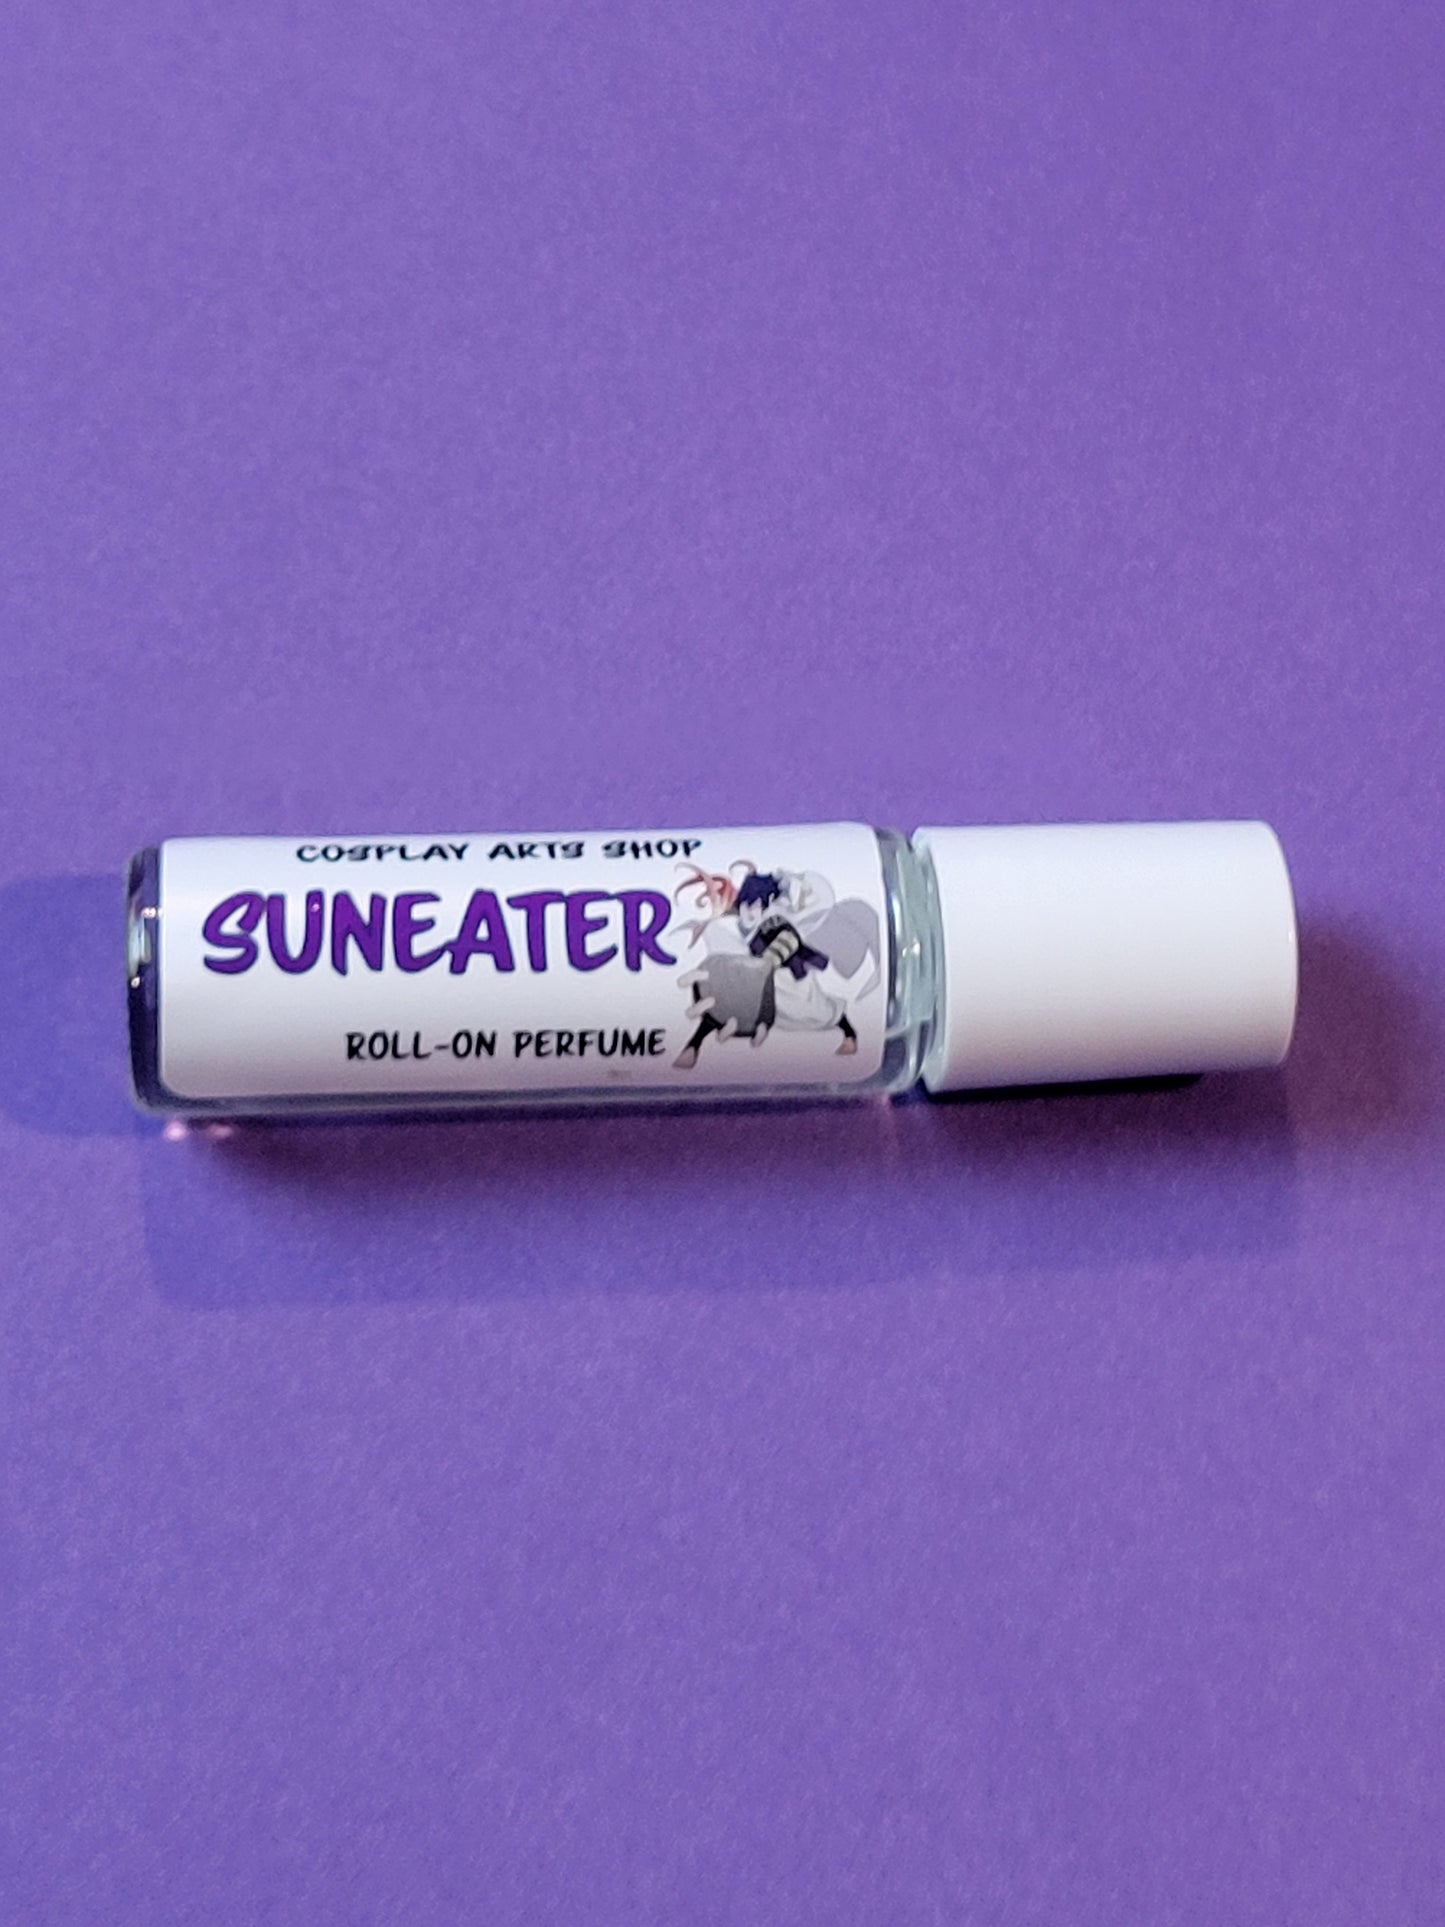 Suneater Roll On - Cosplay Arts Shop